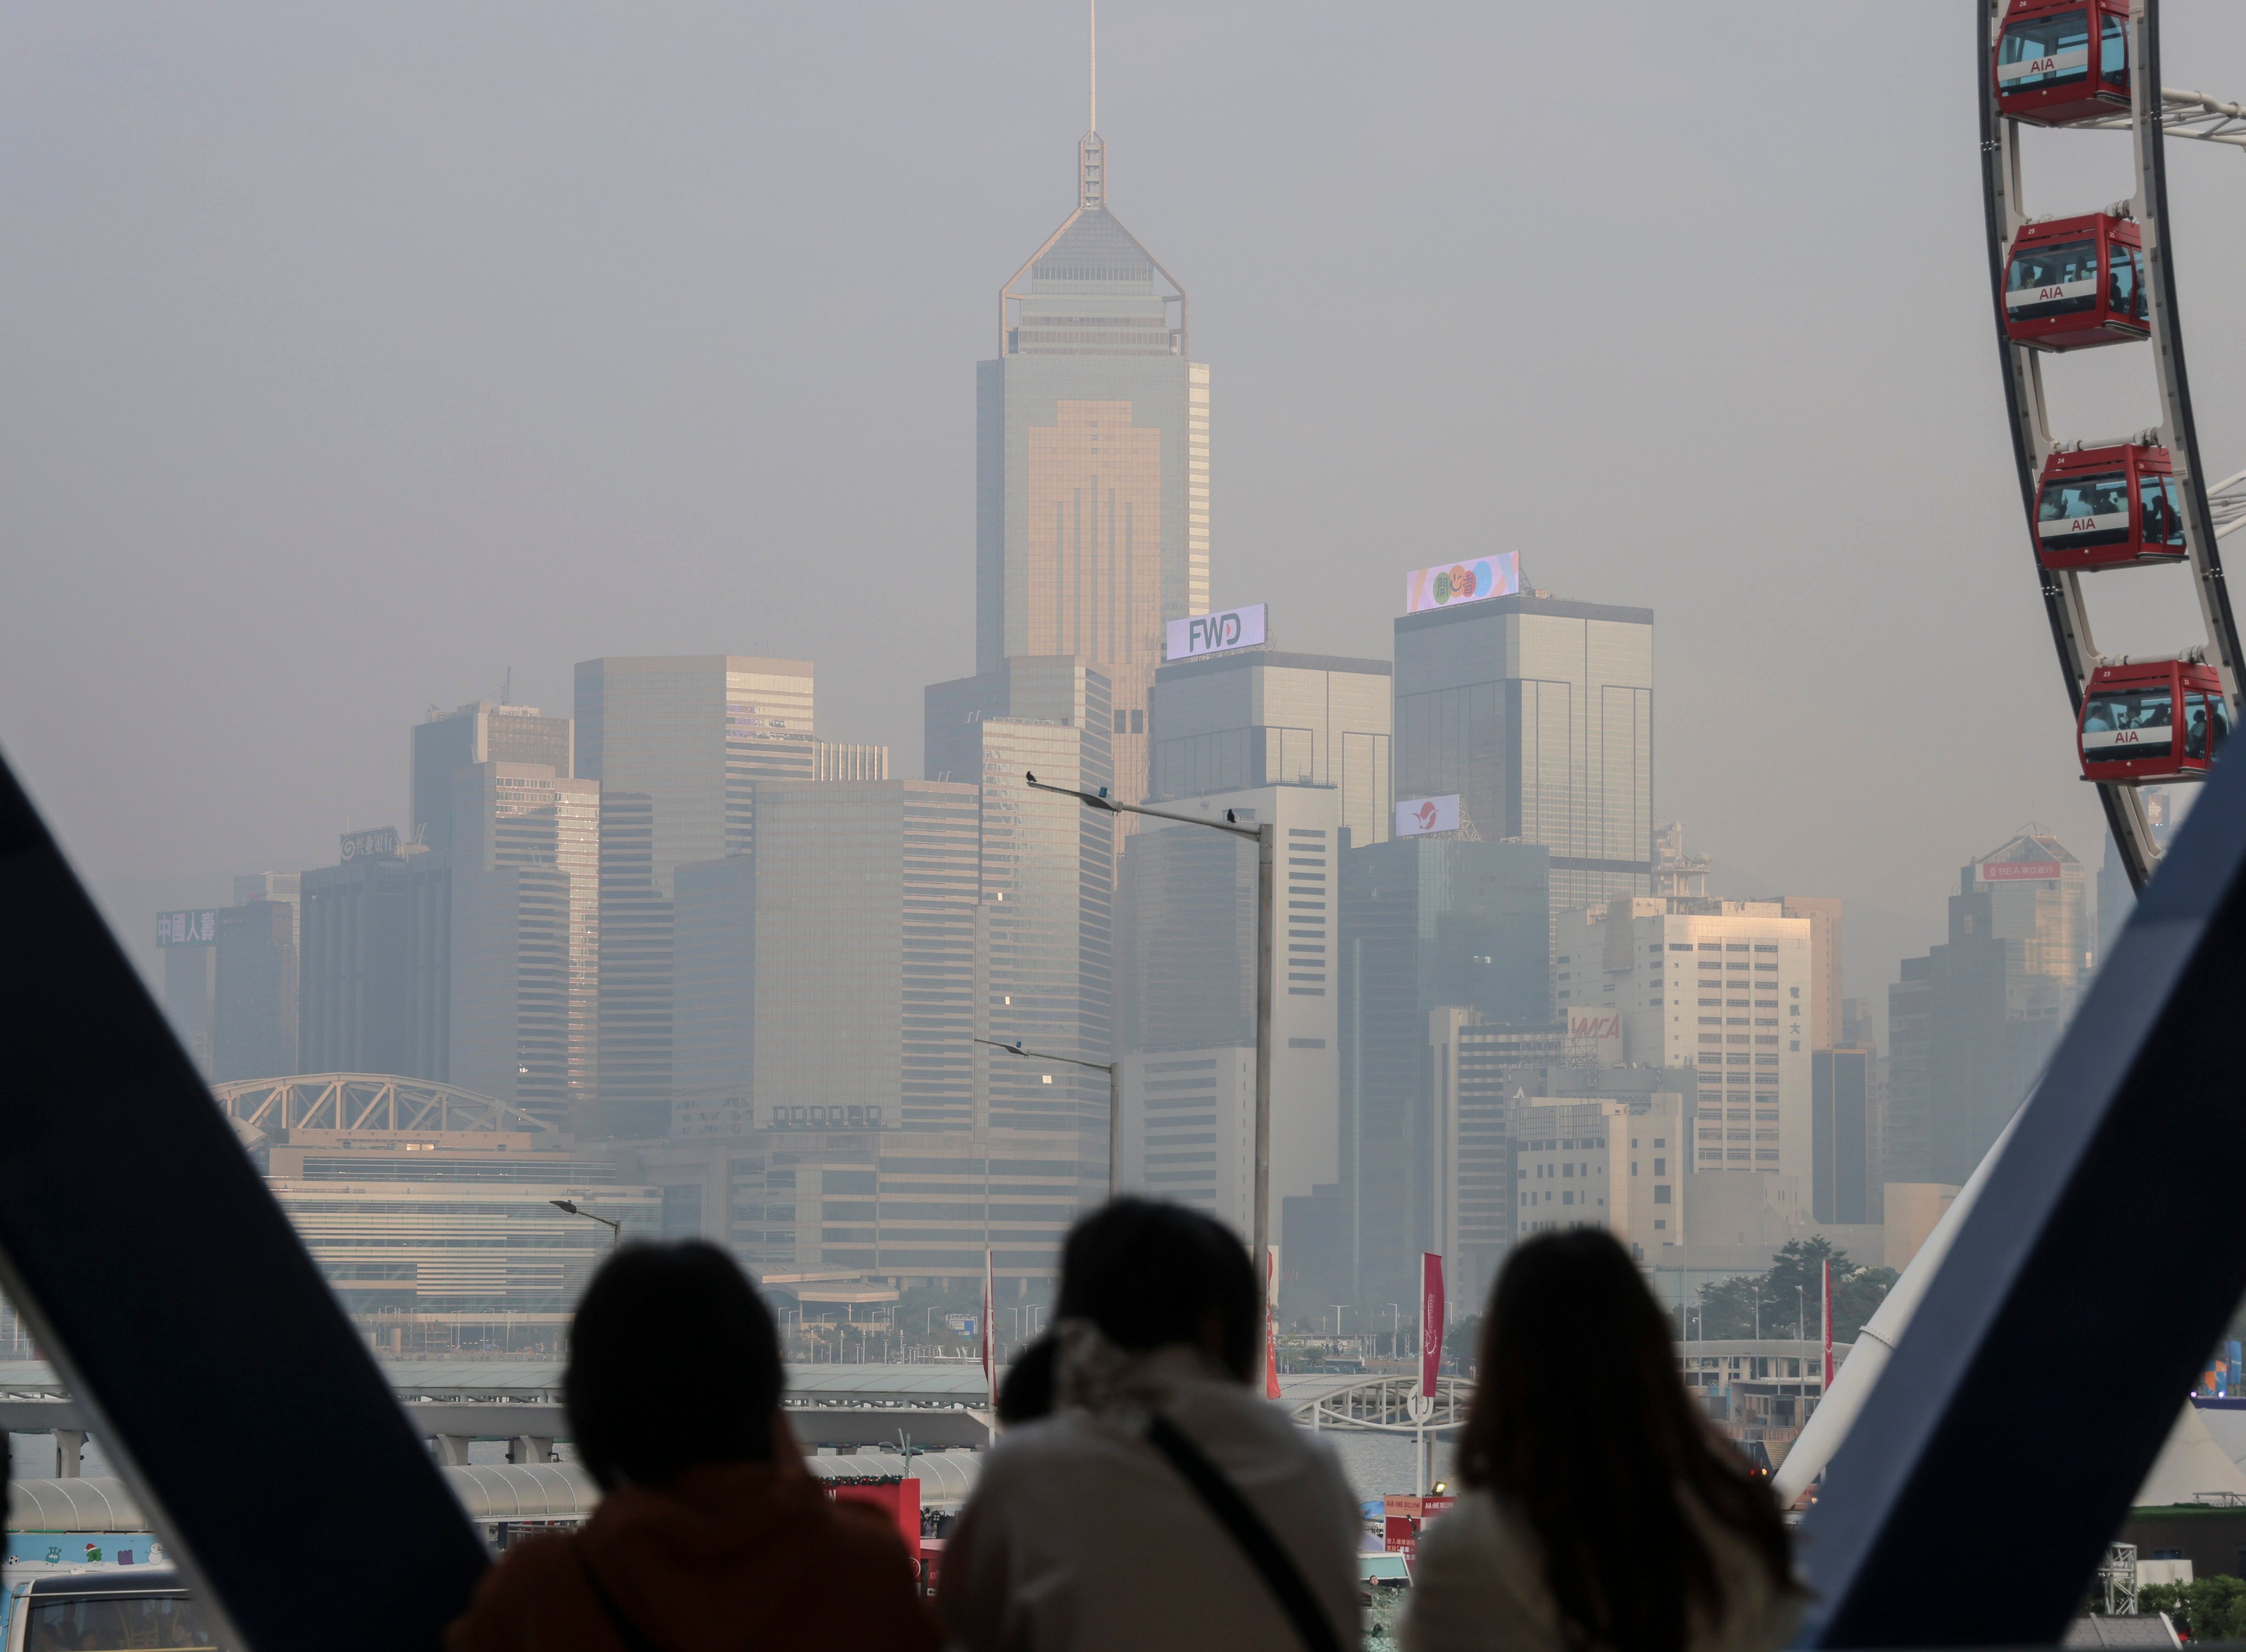 In Hong Kong, air pollution risk levels are graded on the Air Quality Health Index, which groups readings into the categories of low, moderate, high, very high and serious. Photo: Dickson Lee